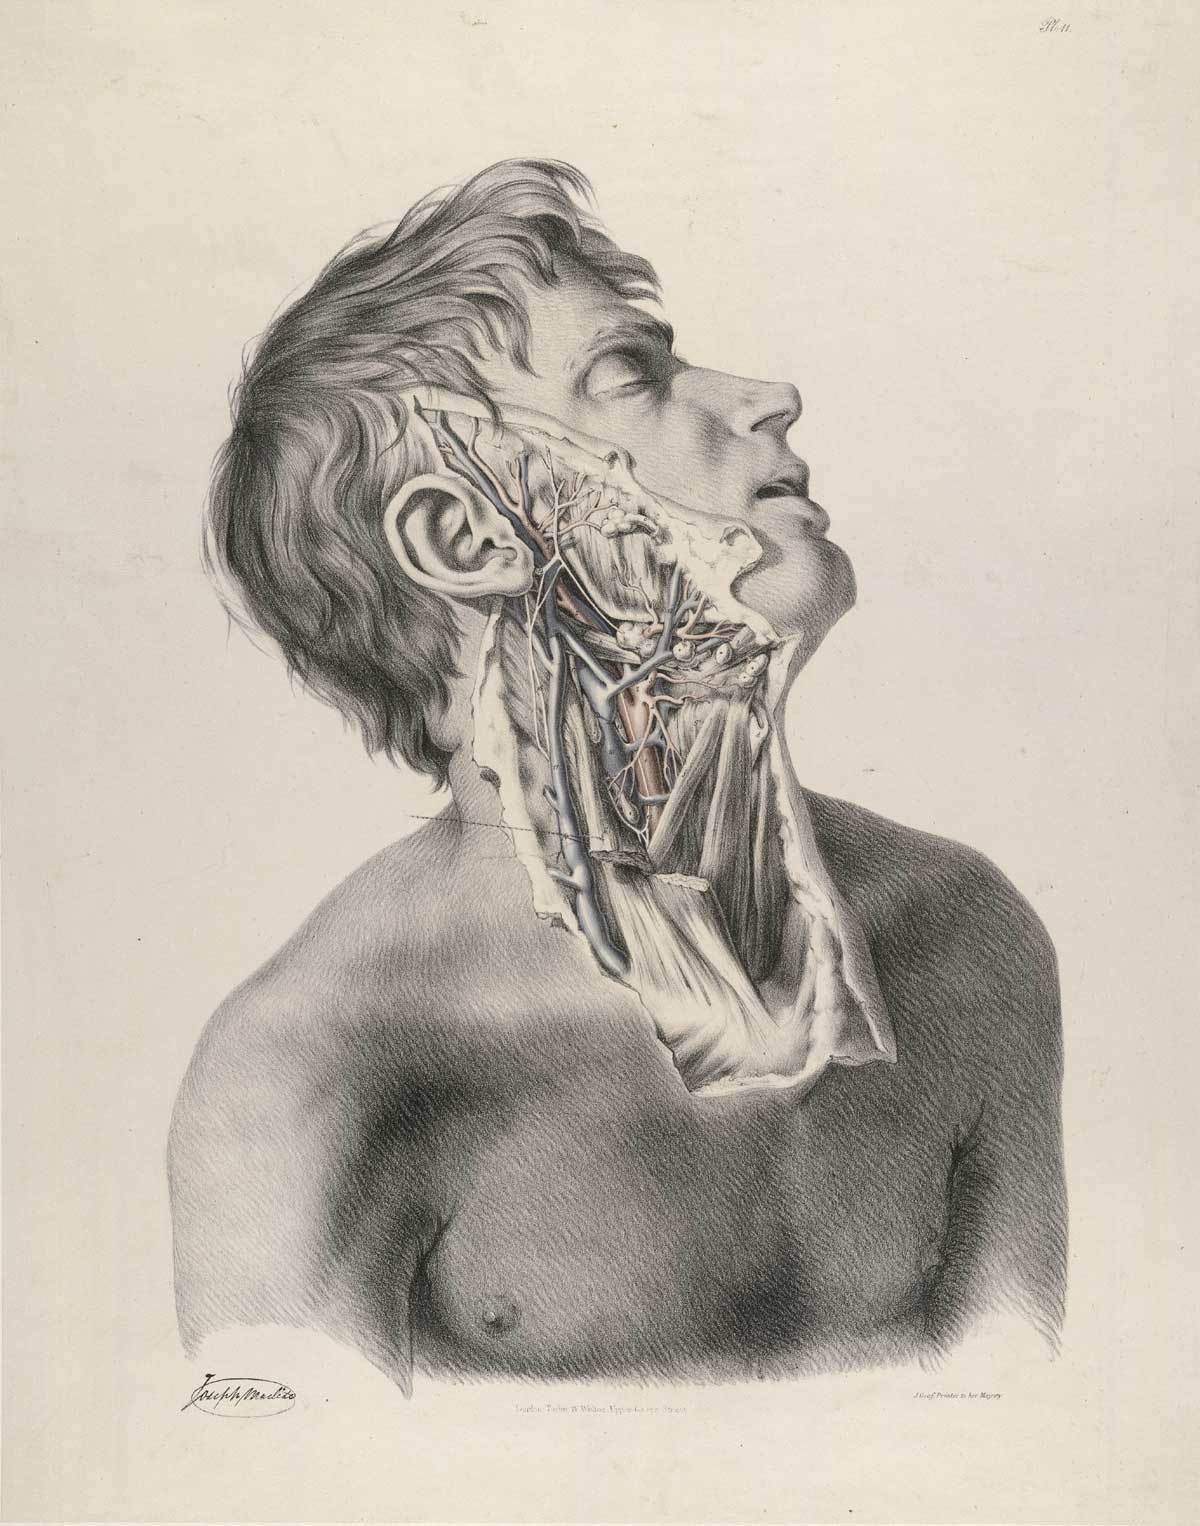 Plate 11 of Quain's The anatomy of the arteries of the human body, with its applications to pathology and operative surgery, featuring the right side view of the flayed body of a male corpse from the neck to the middle of his cheek displaying the muscles, nerves and arteries of the neck and face.